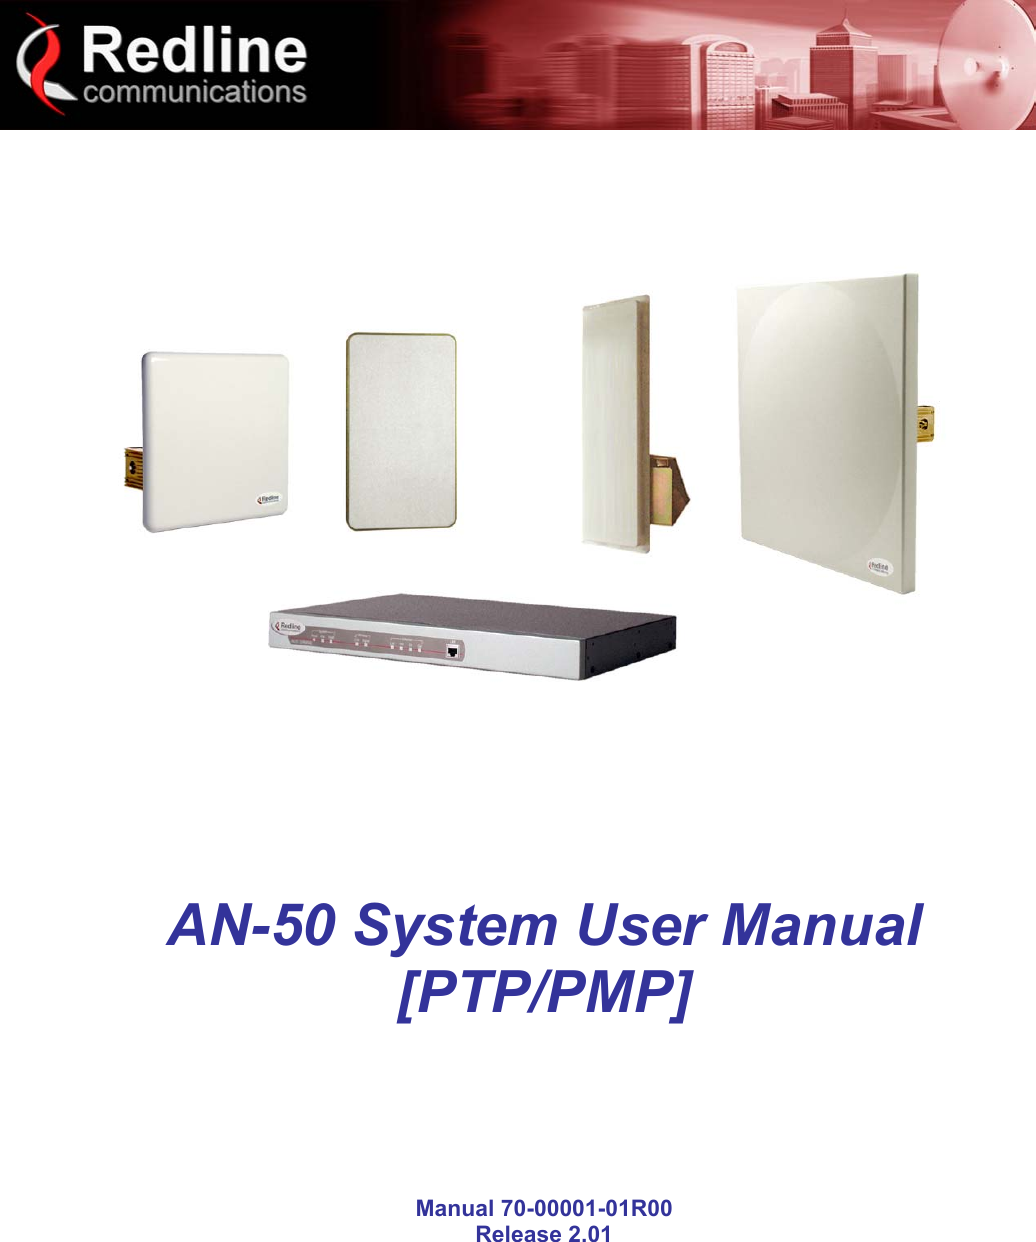     AN-50 System User Manual                 AN-50 System User Manual [PTP/PMP]       Manual 70-00001-01R00 Release 2.01 